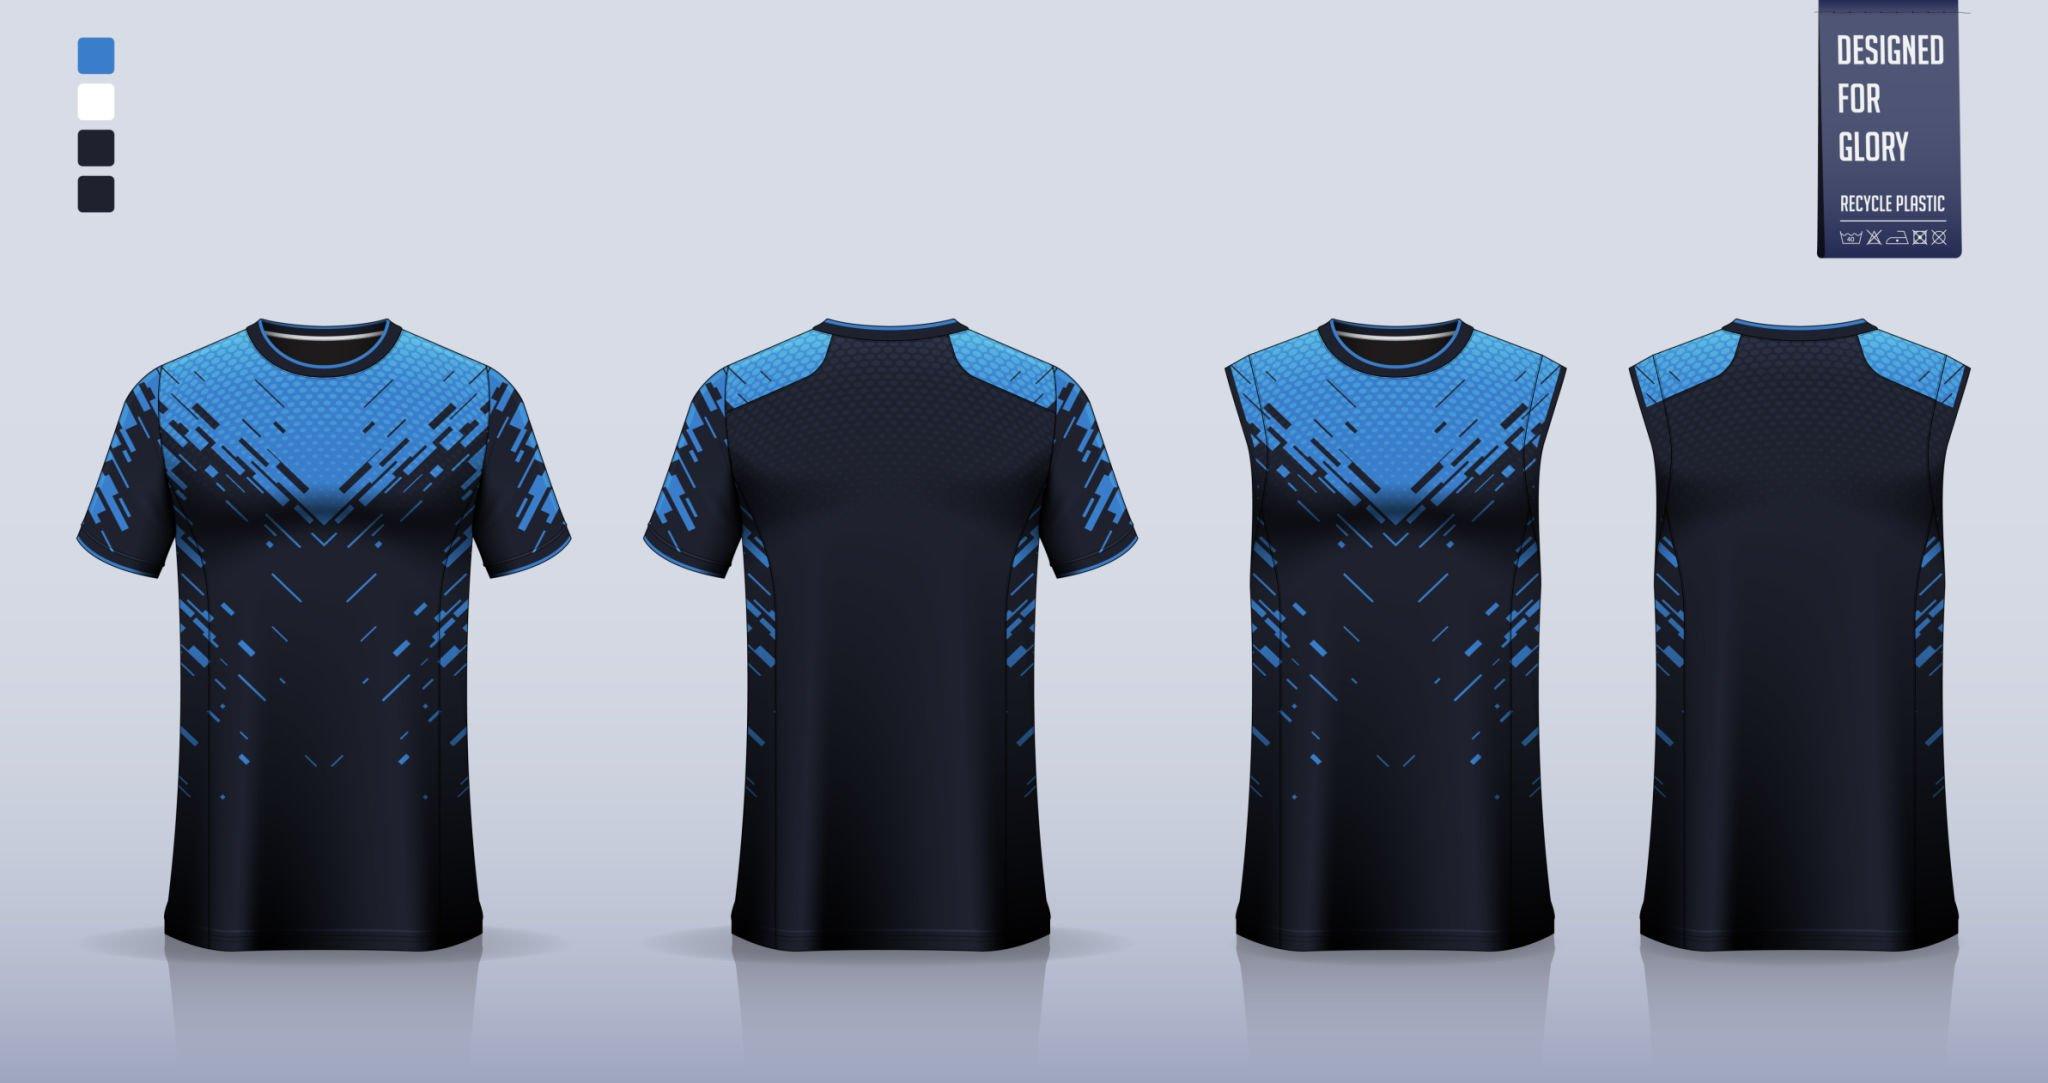 How to Choose the Best Shirt for Sublimation Printing